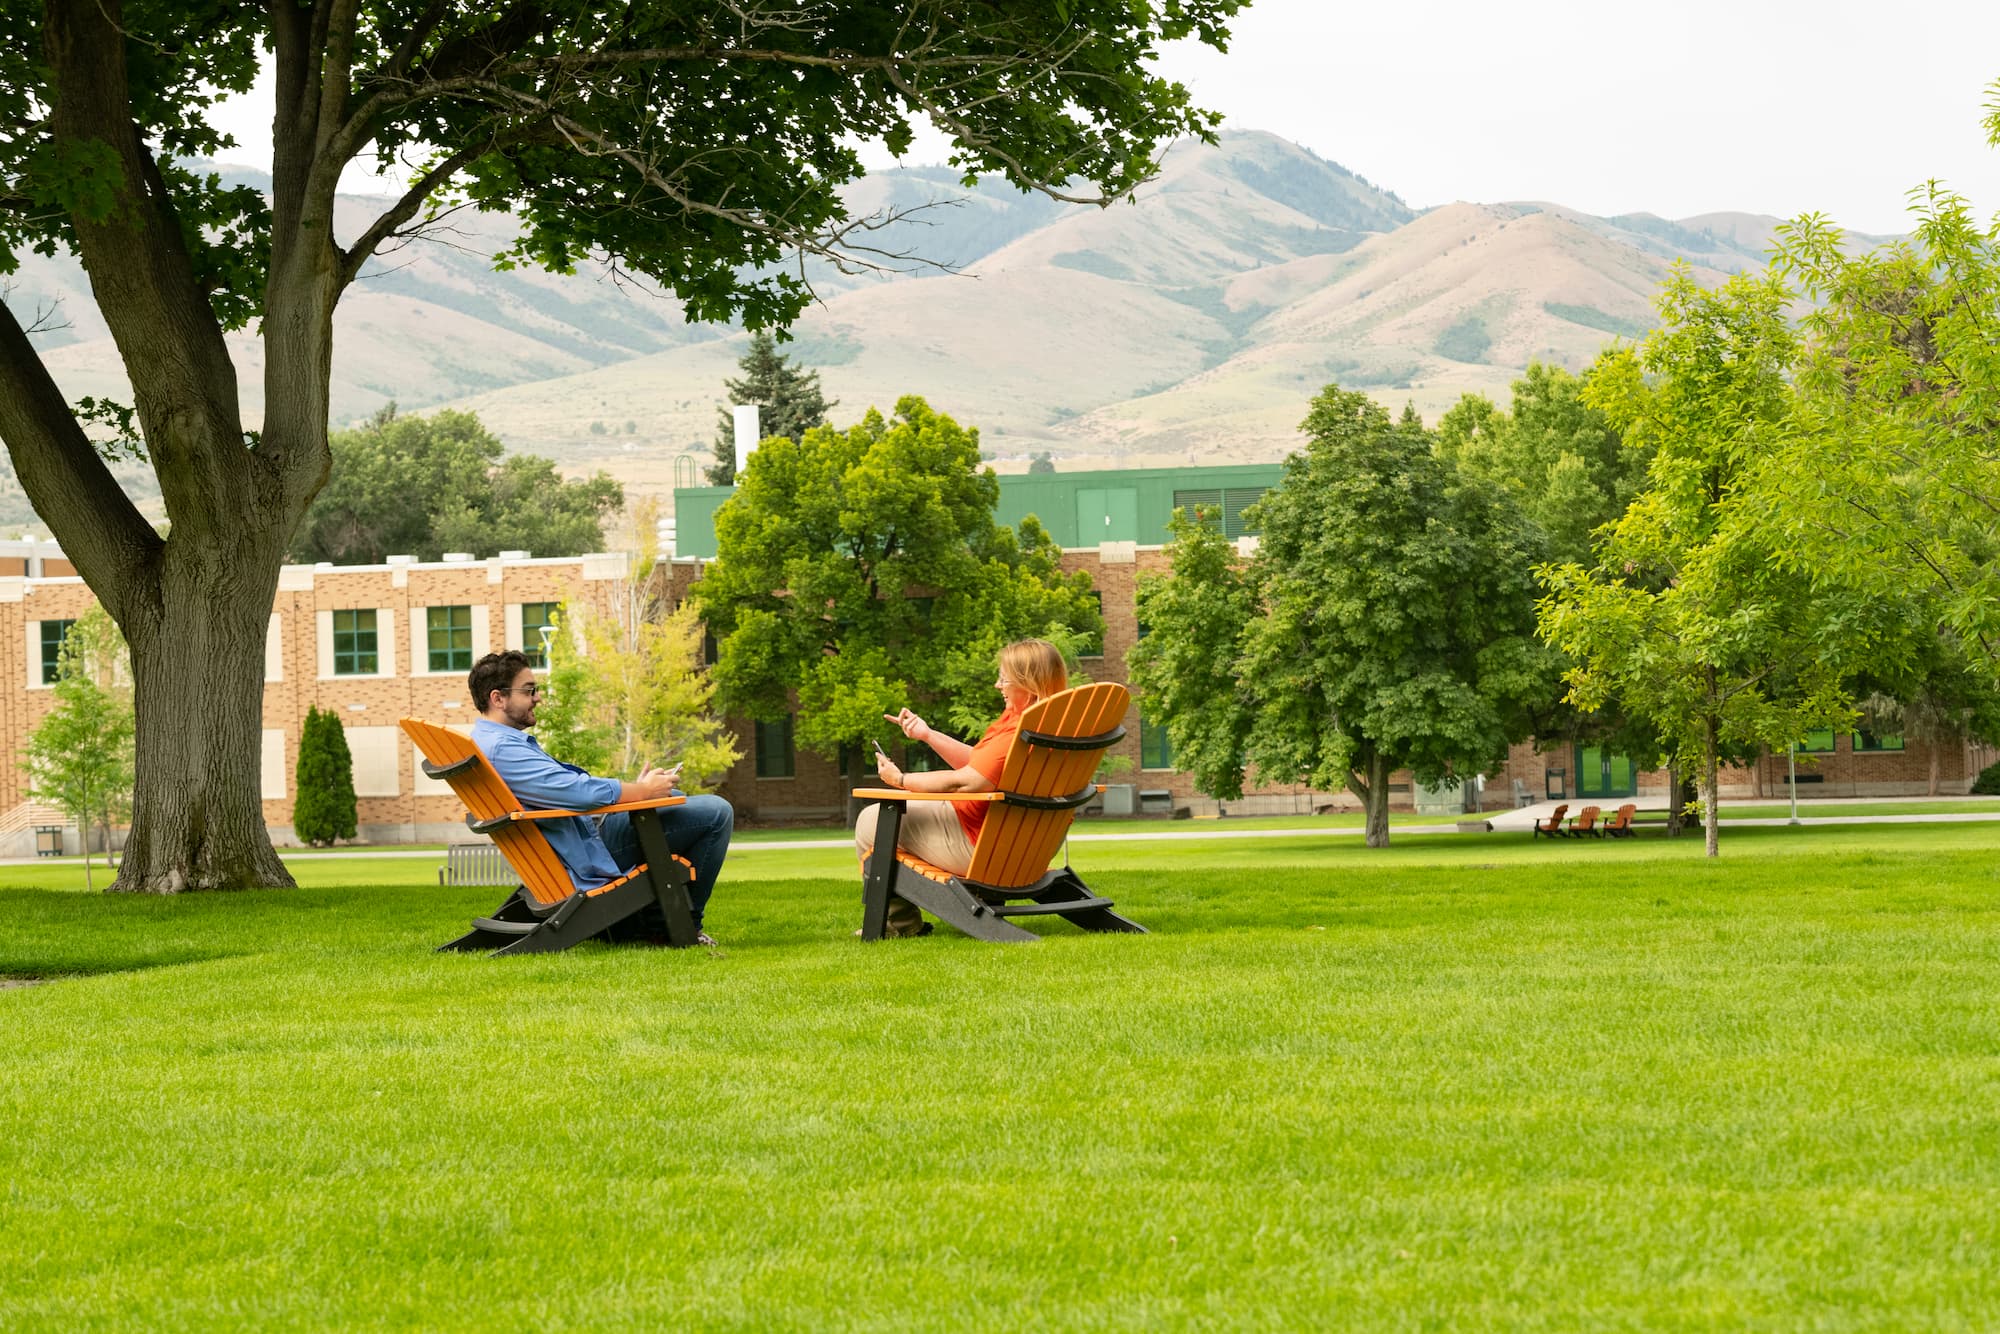 Students talking in lawnchairs on the quad.